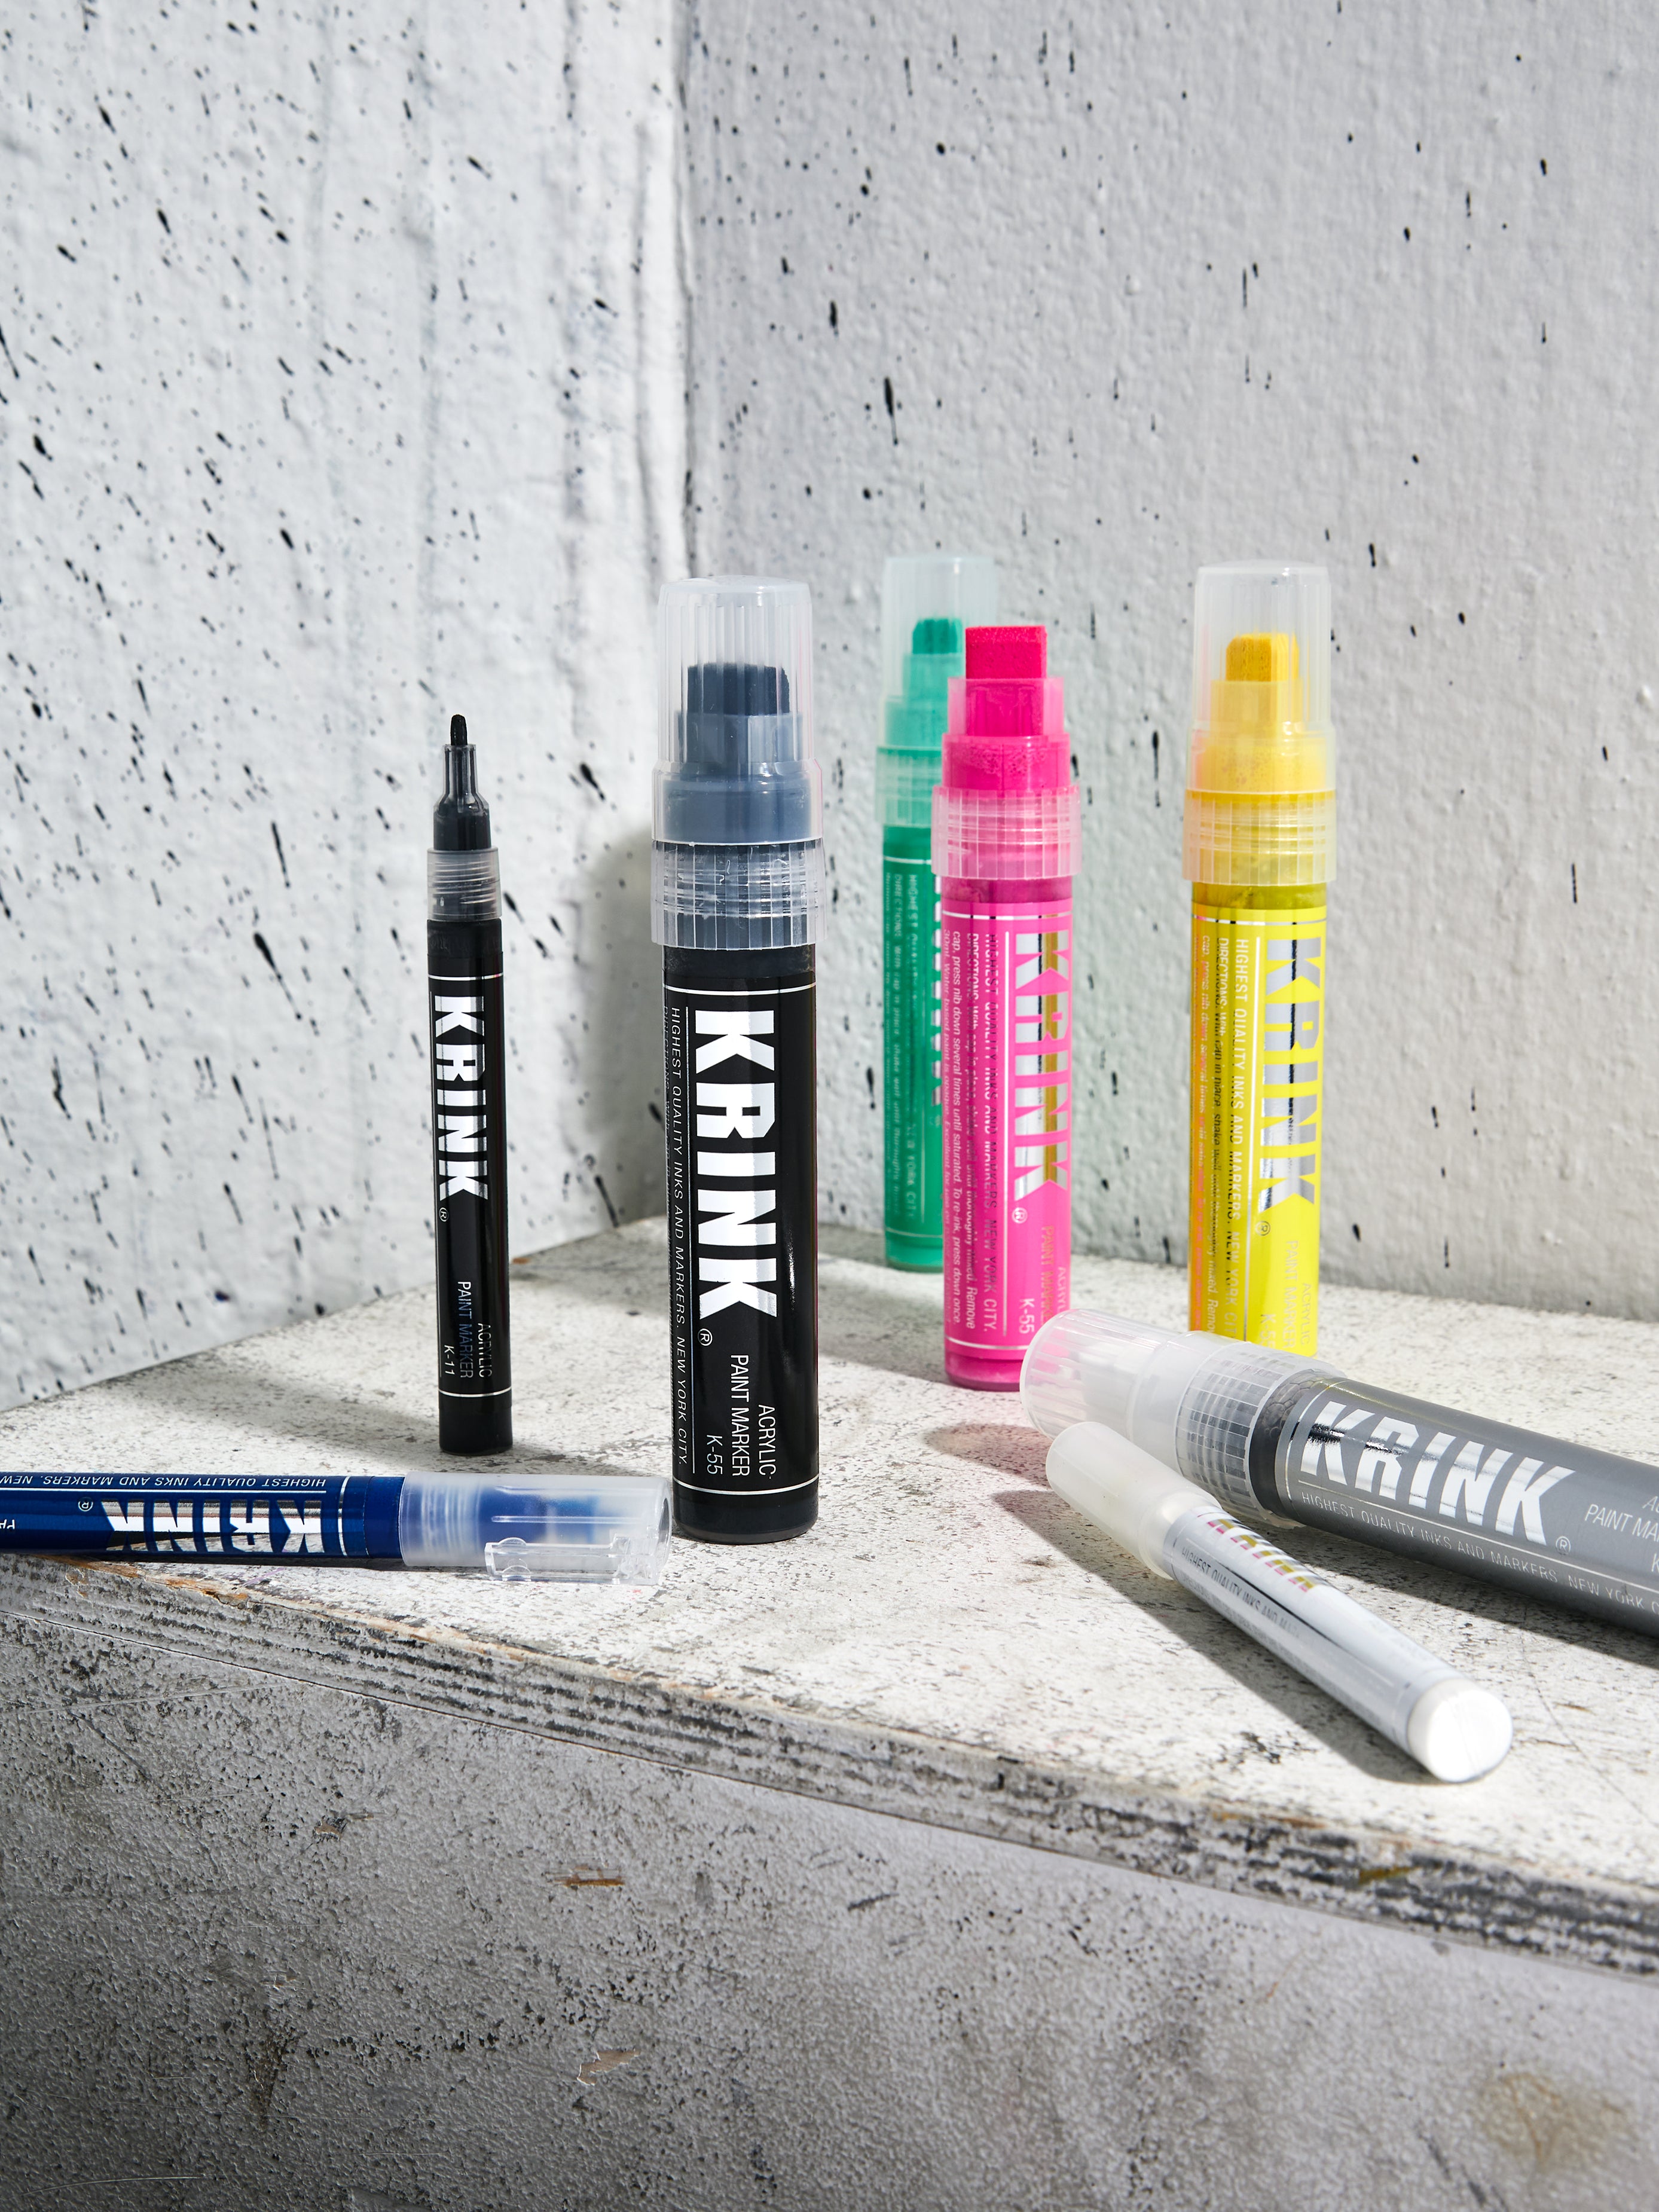 Paint Markers - Krink